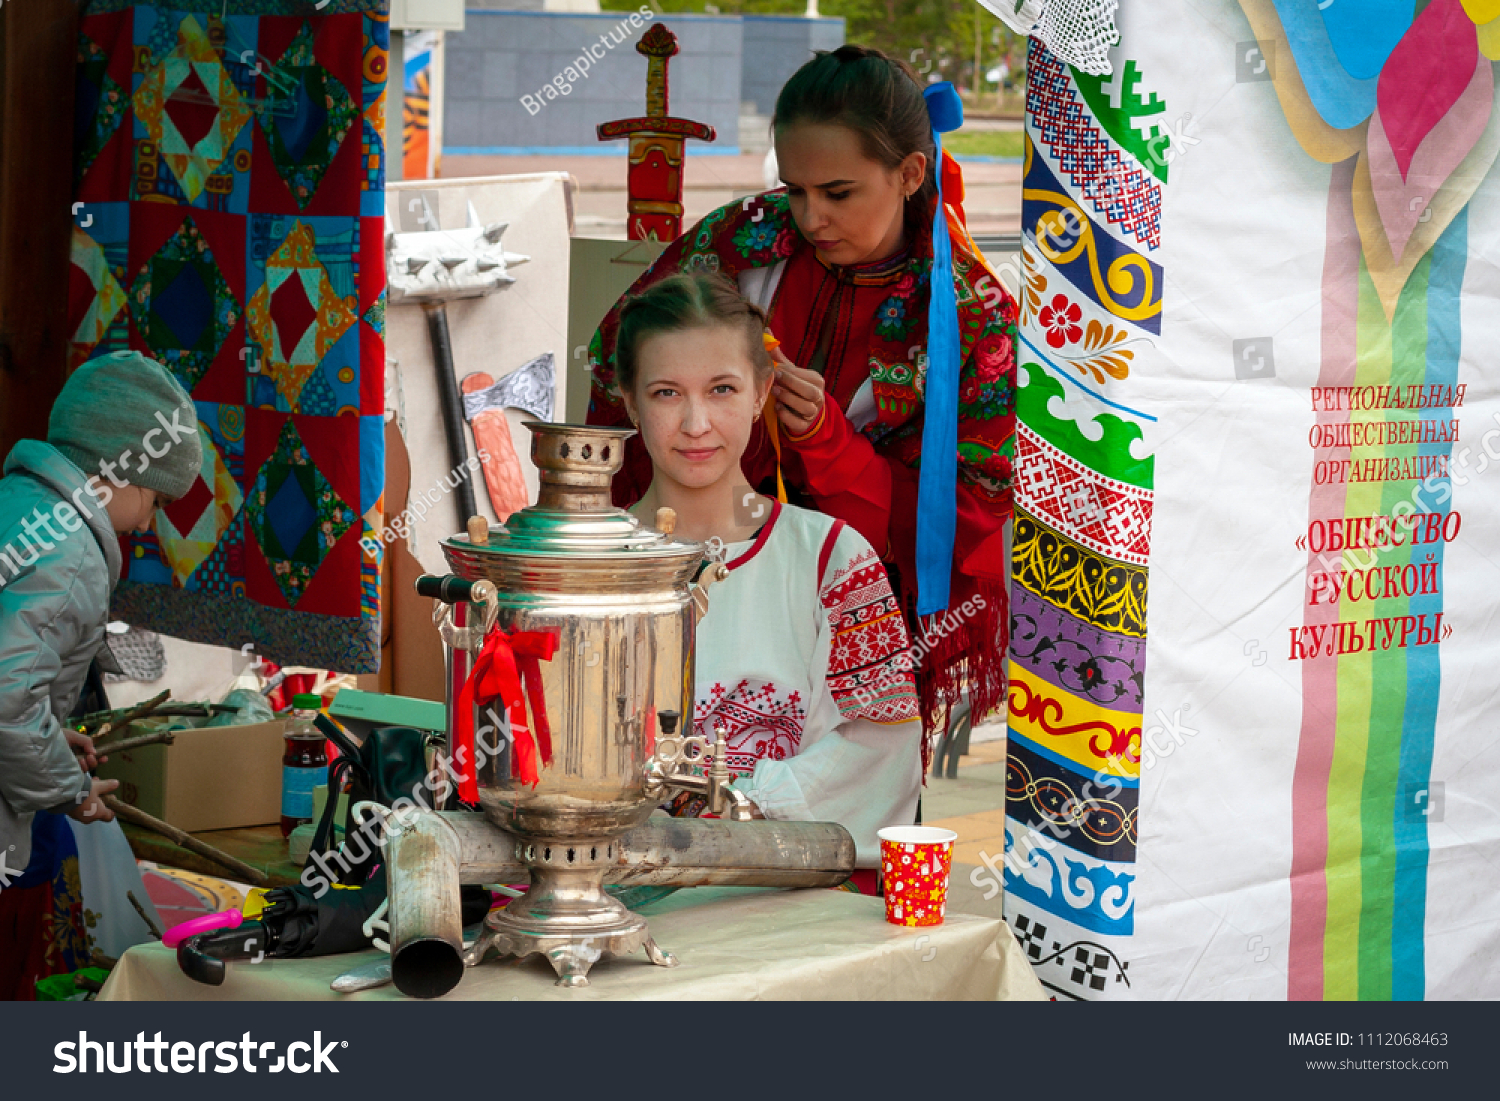 Surgut, Russia, 06/12/2018: Holiday Russia Day. Beautiful girls in national Russian costumes. #1112068463